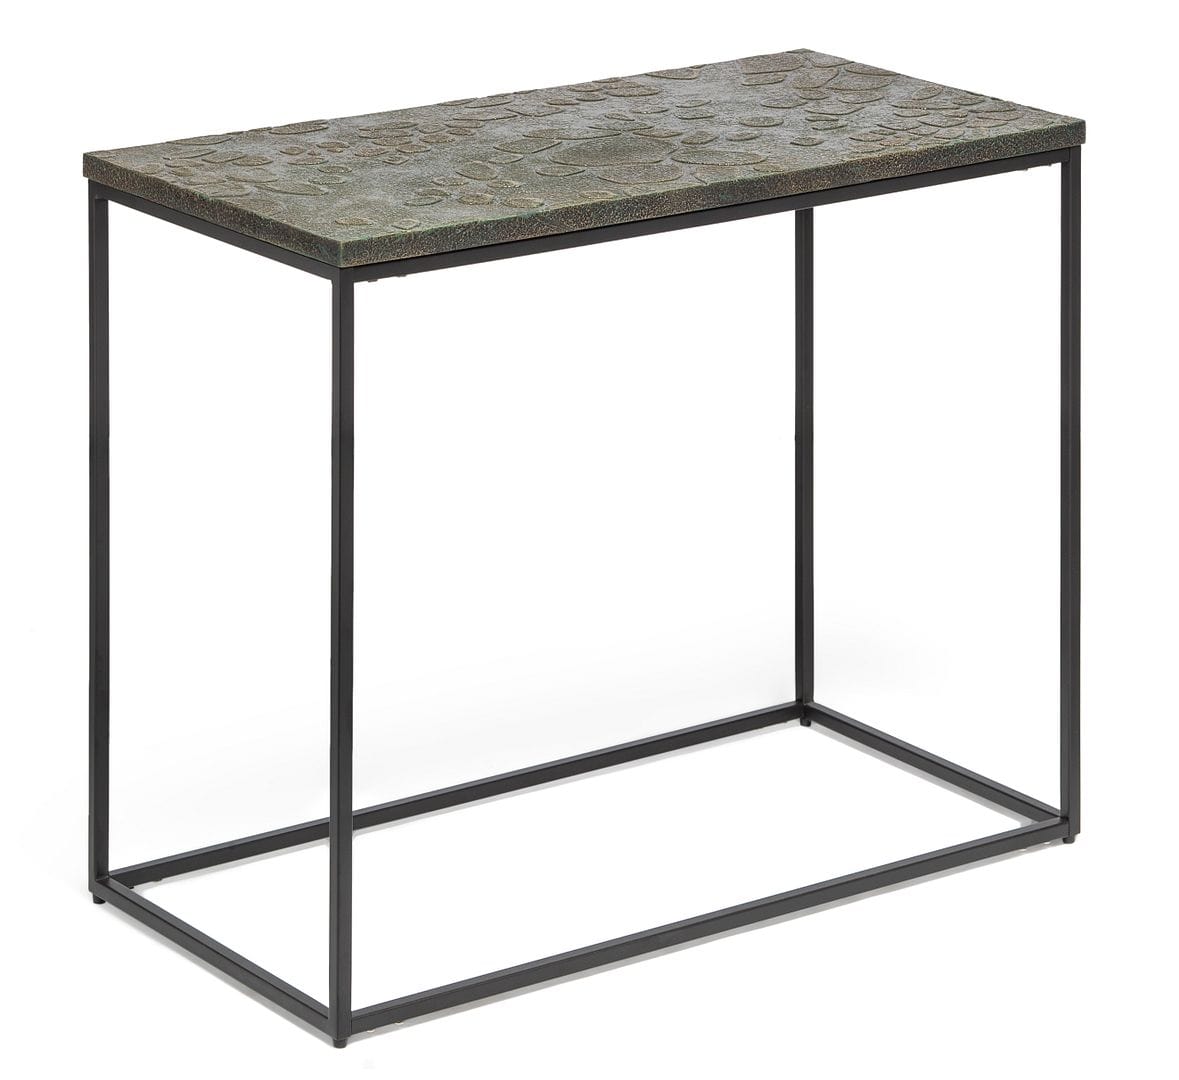 Stylish Black Sofa Side Table with Textured Wood Top